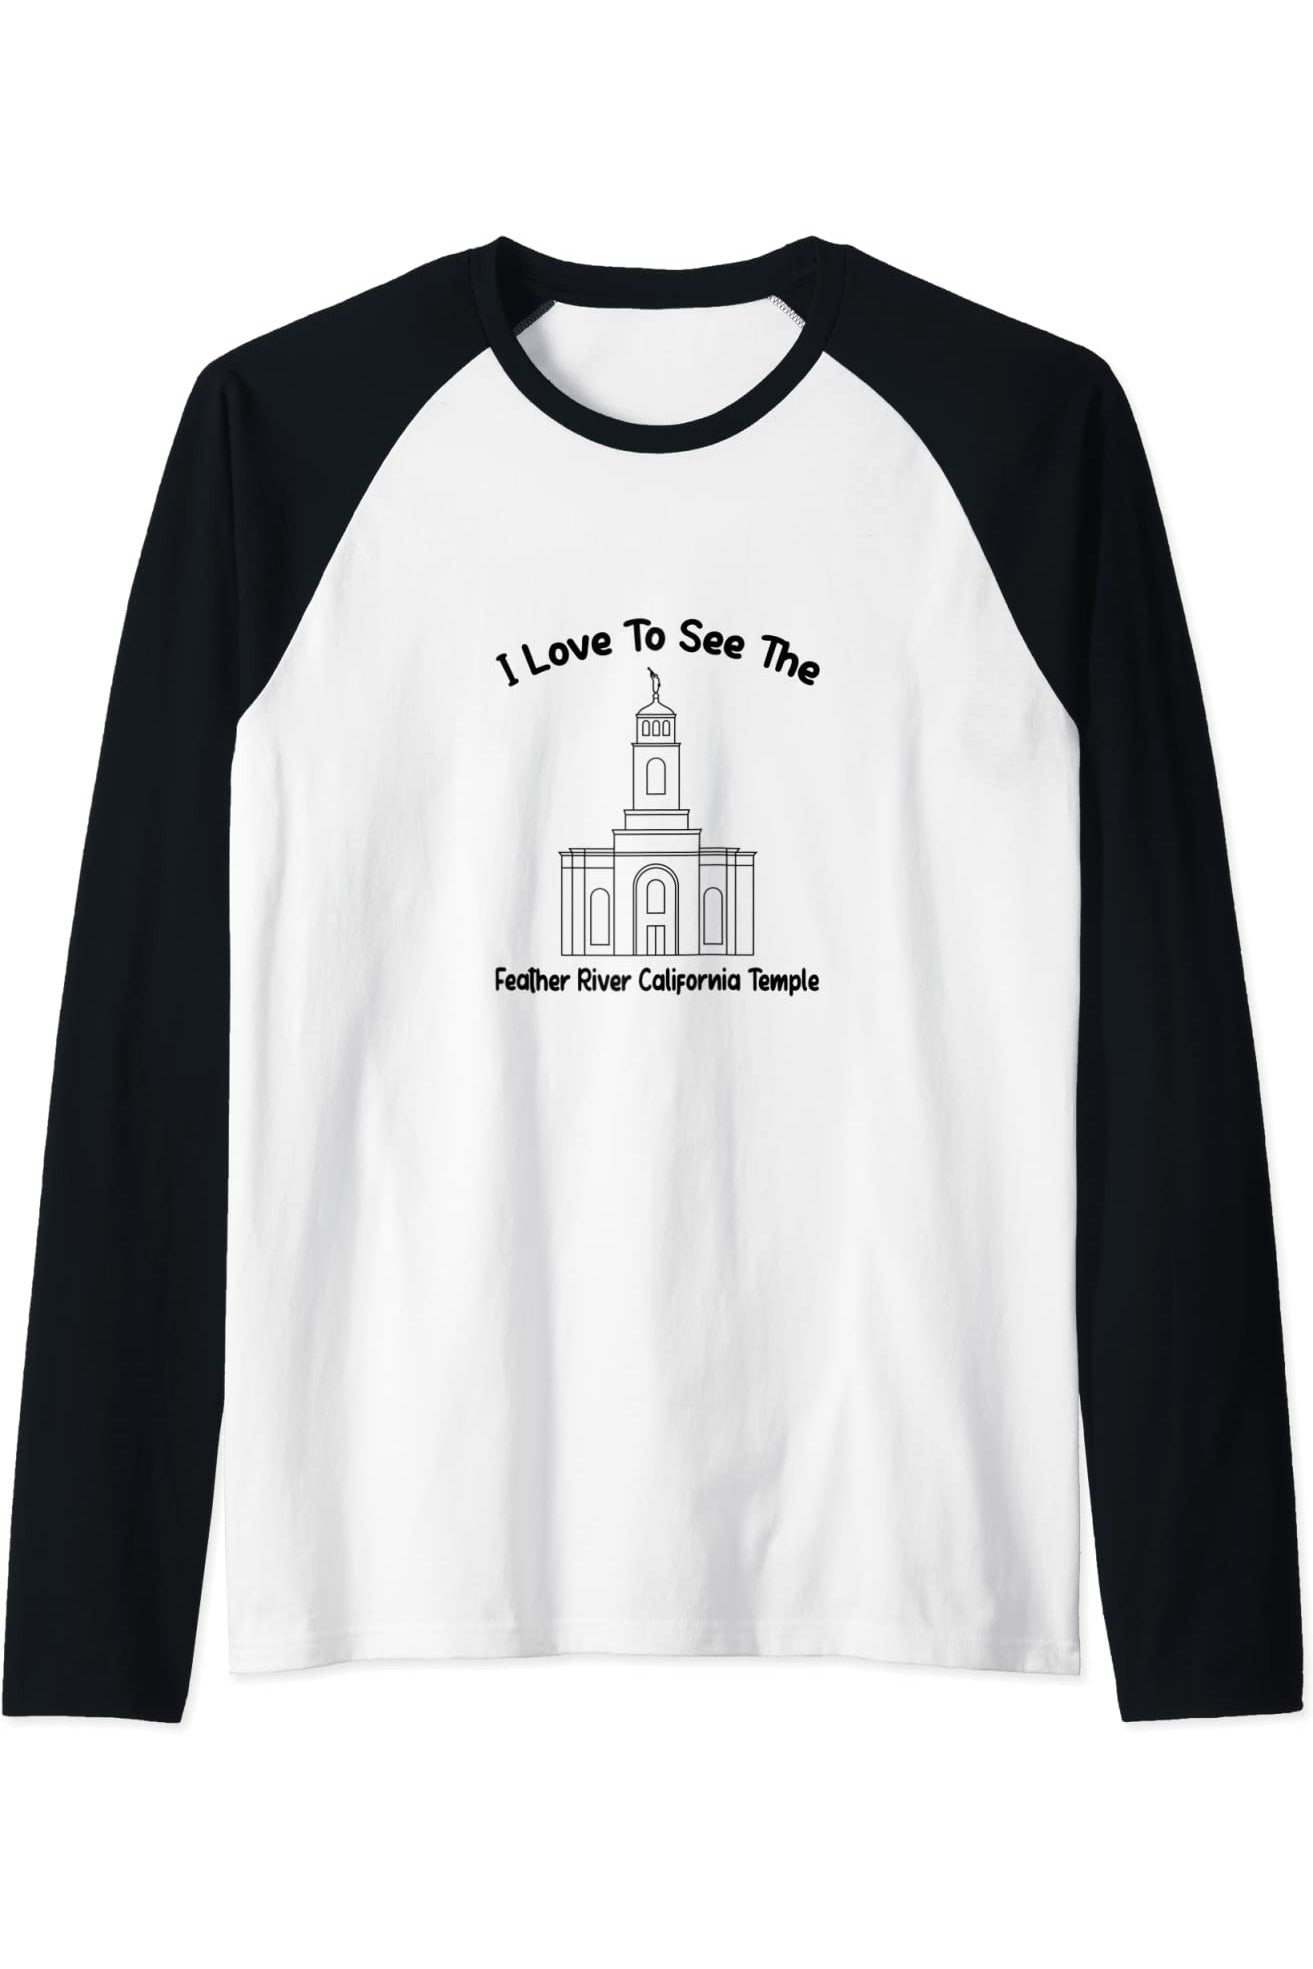 Feather River California Temple Raglan - Primary Style (English) US